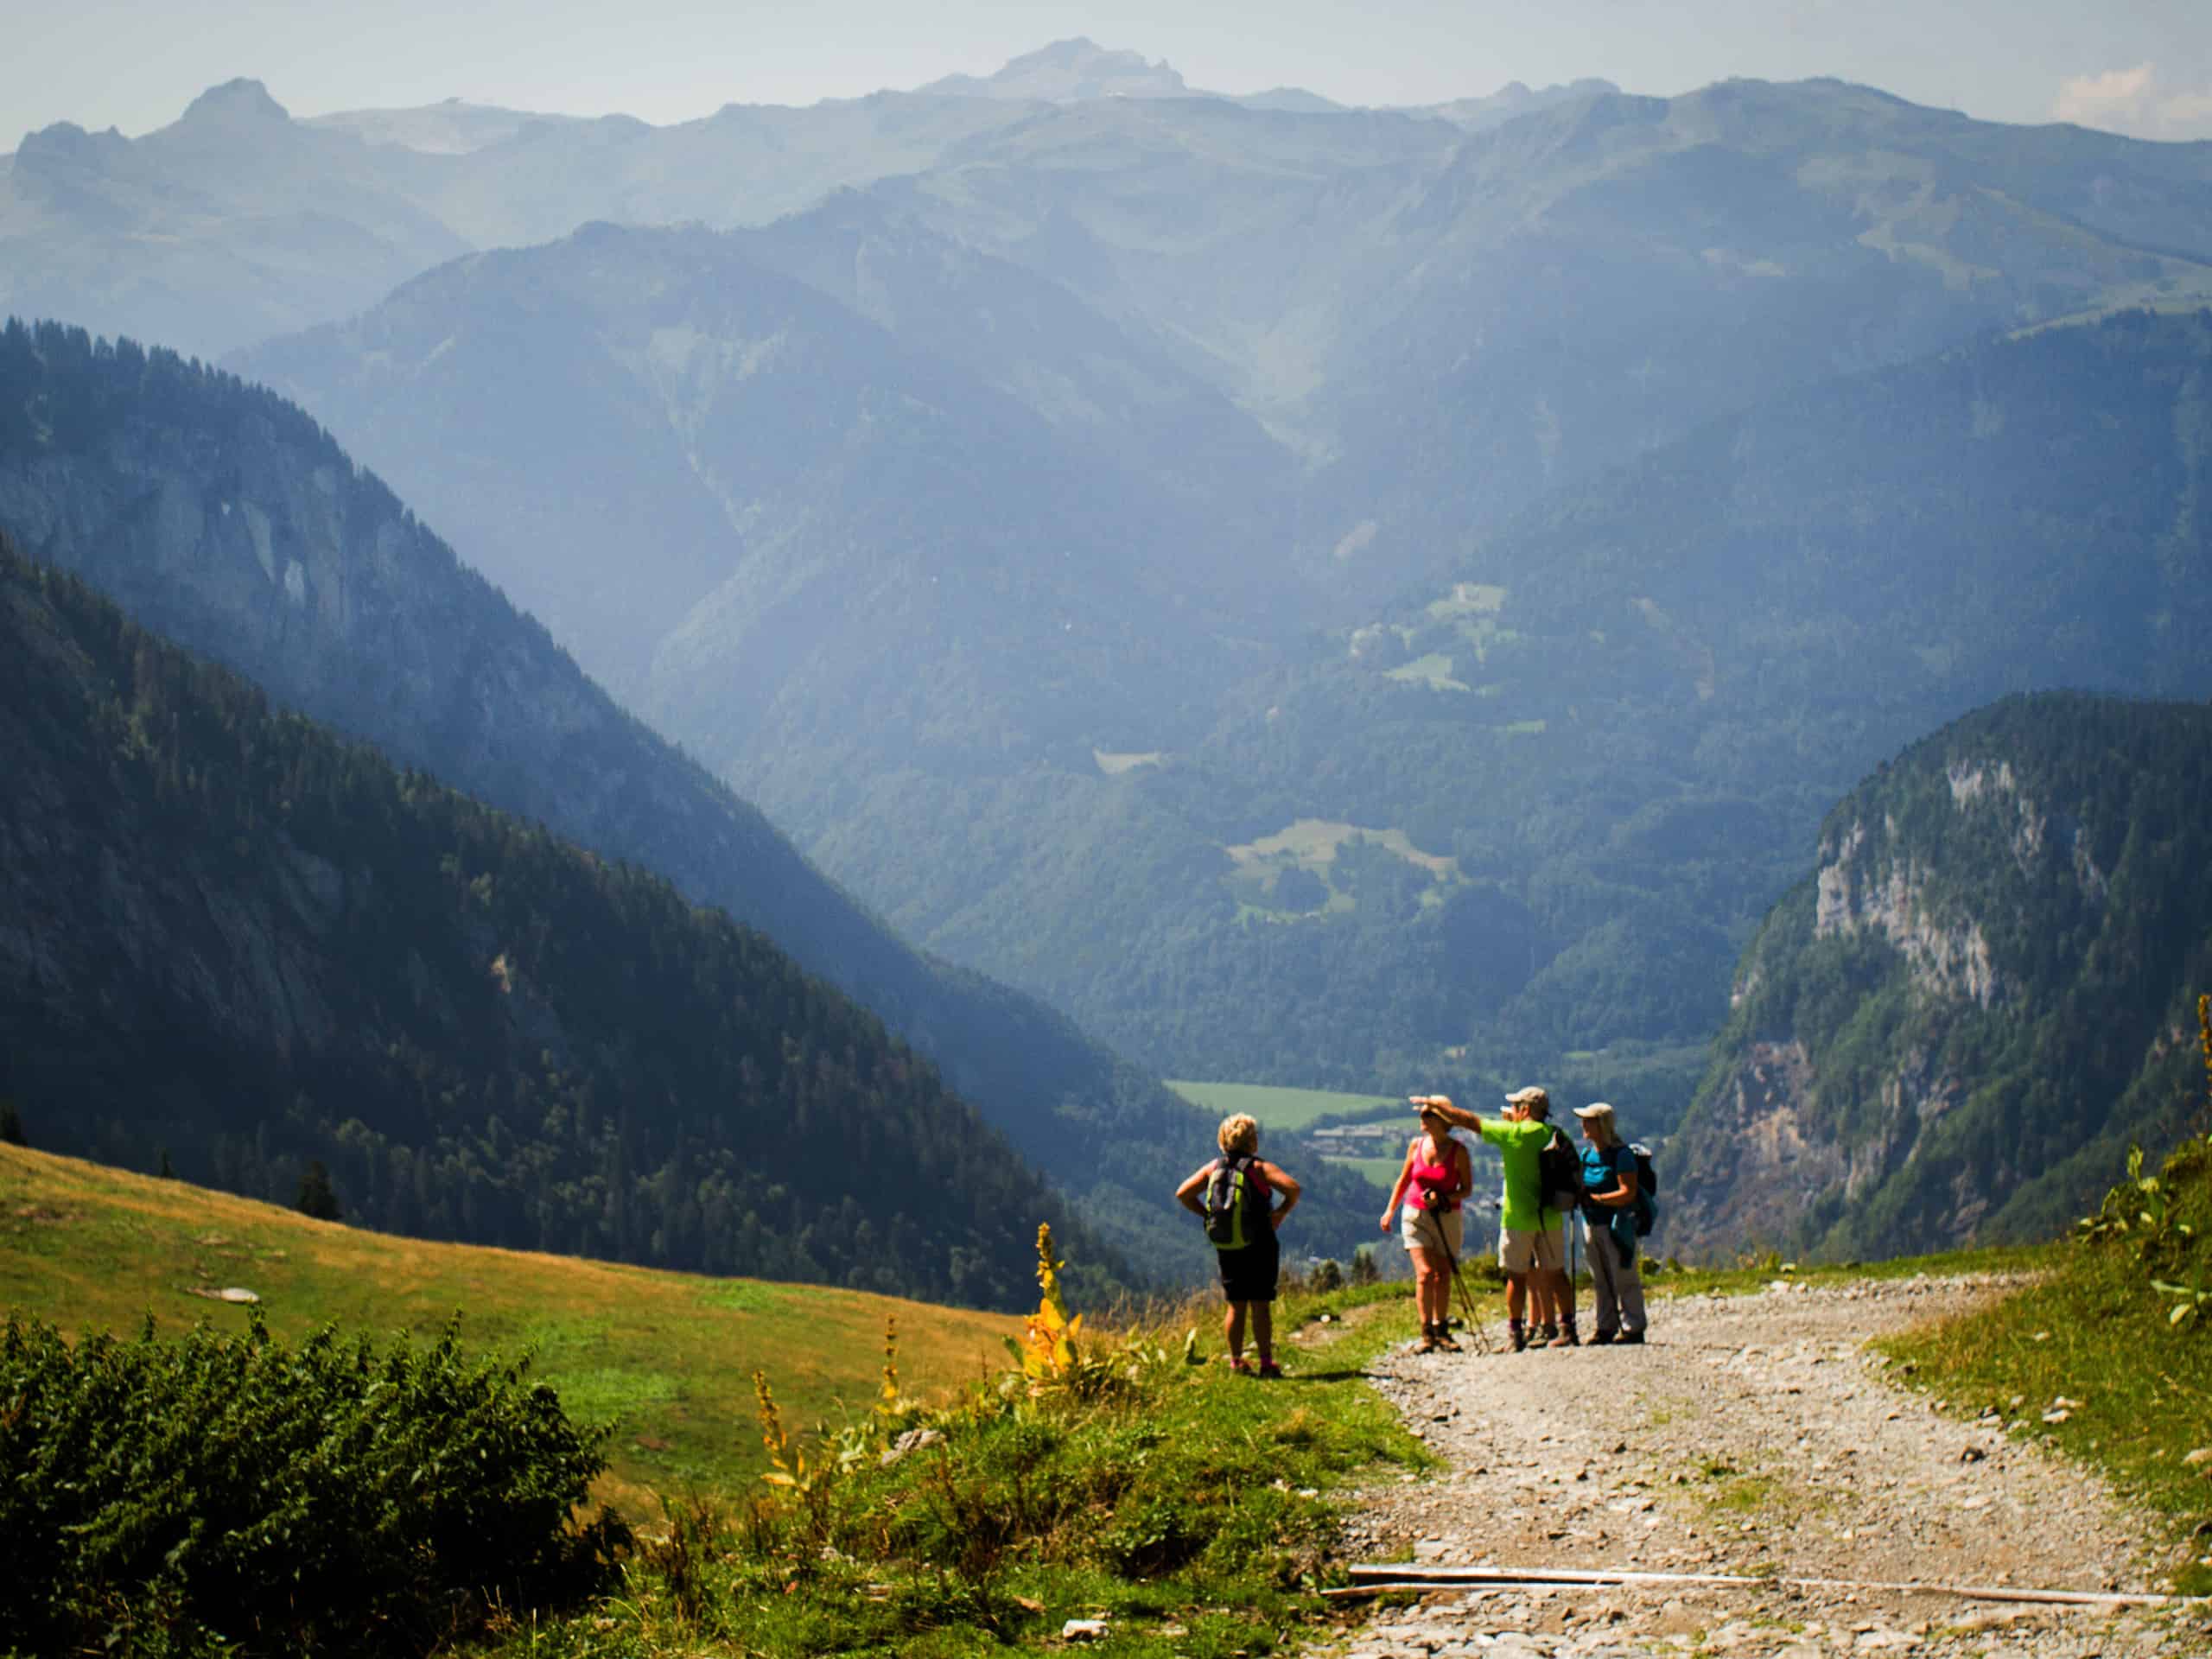 Spring activities in the Alps: Hiking and Walking